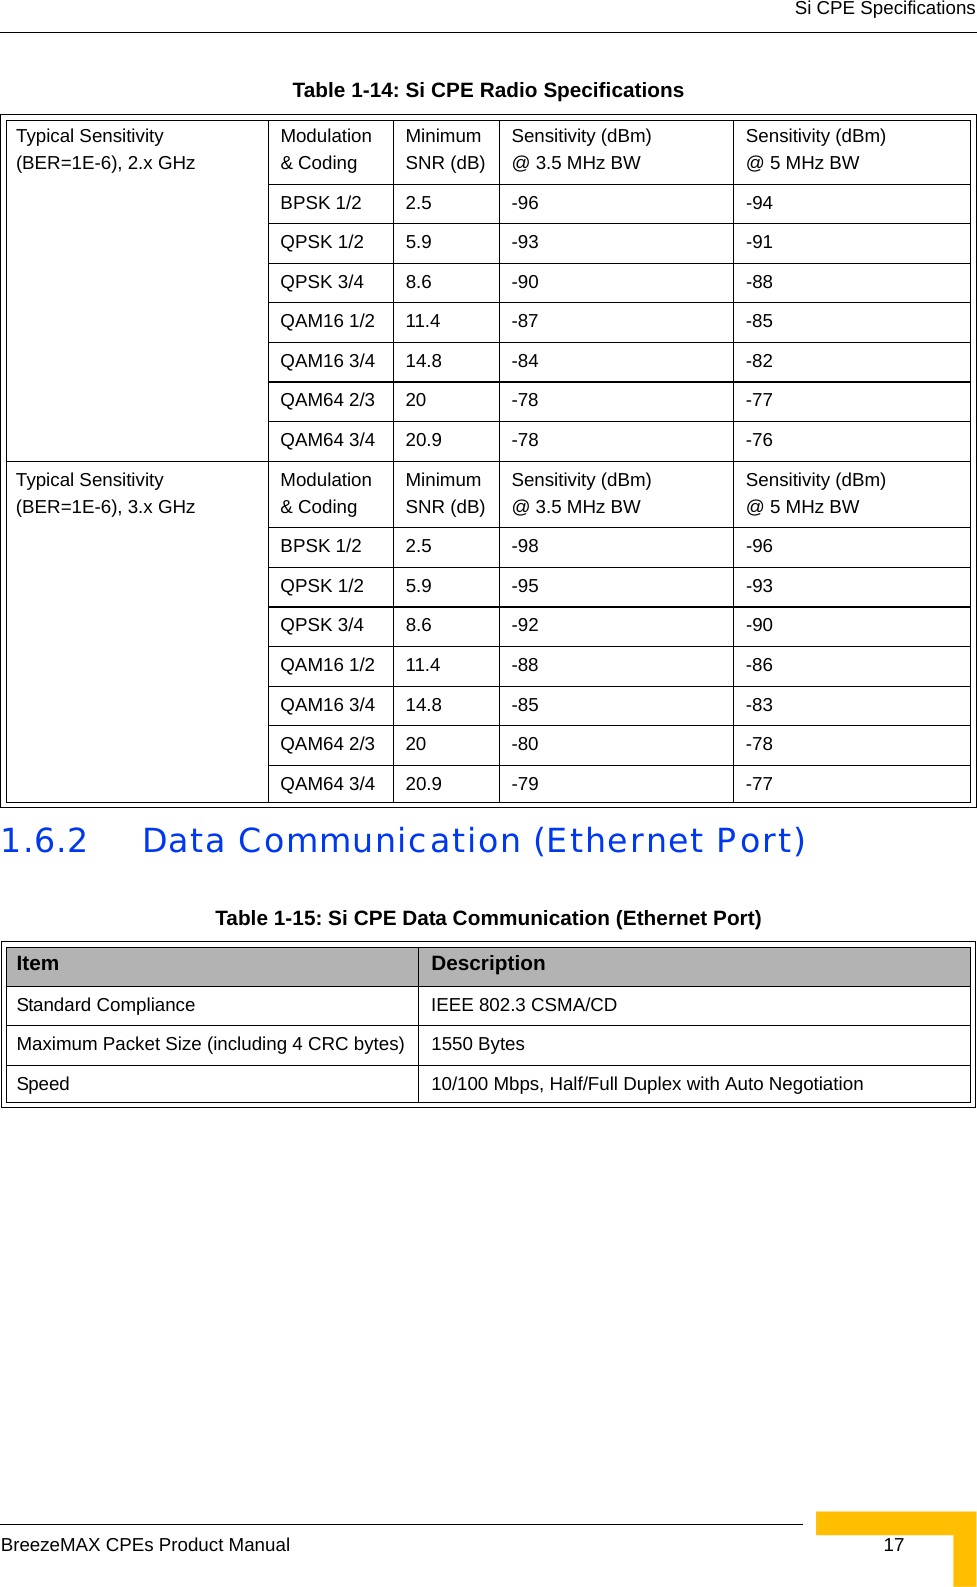 Si CPE SpecificationsBreezeMAX CPEs Product Manual  171.6.2 Data Communication (Ethernet Port)Typical Sensitivity (BER=1E-6), 2.x GHzModulation &amp; CodingMinimum SNR (dB)Sensitivity (dBm) @ 3.5 MHz BWSensitivity (dBm) @ 5 MHz BWBPSK 1/2 2.5 -96 -94QPSK 1/2 5.9 -93 -91QPSK 3/4 8.6 -90 -88QAM16 1/2 11.4 -87 -85QAM16 3/4 14.8 -84 -82QAM64 2/3 20 -78 -77QAM64 3/4 20.9 -78 -76Typical Sensitivity (BER=1E-6), 3.x GHzModulation &amp; CodingMinimum SNR (dB)Sensitivity (dBm) @ 3.5 MHz BWSensitivity (dBm) @ 5 MHz BWBPSK 1/2 2.5 -98 -96QPSK 1/2 5.9 -95 -93QPSK 3/4 8.6 -92 -90QAM16 1/2 11.4 -88 -86QAM16 3/4 14.8 -85 -83QAM64 2/3 20 -80 -78QAM64 3/4 20.9 -79 -77Table 1-15: Si CPE Data Communication (Ethernet Port)Item DescriptionStandard Compliance IEEE 802.3 CSMA/CDMaximum Packet Size (including 4 CRC bytes) 1550 BytesSpeed 10/100 Mbps, Half/Full Duplex with Auto NegotiationTable 1-14: Si CPE Radio Specifications